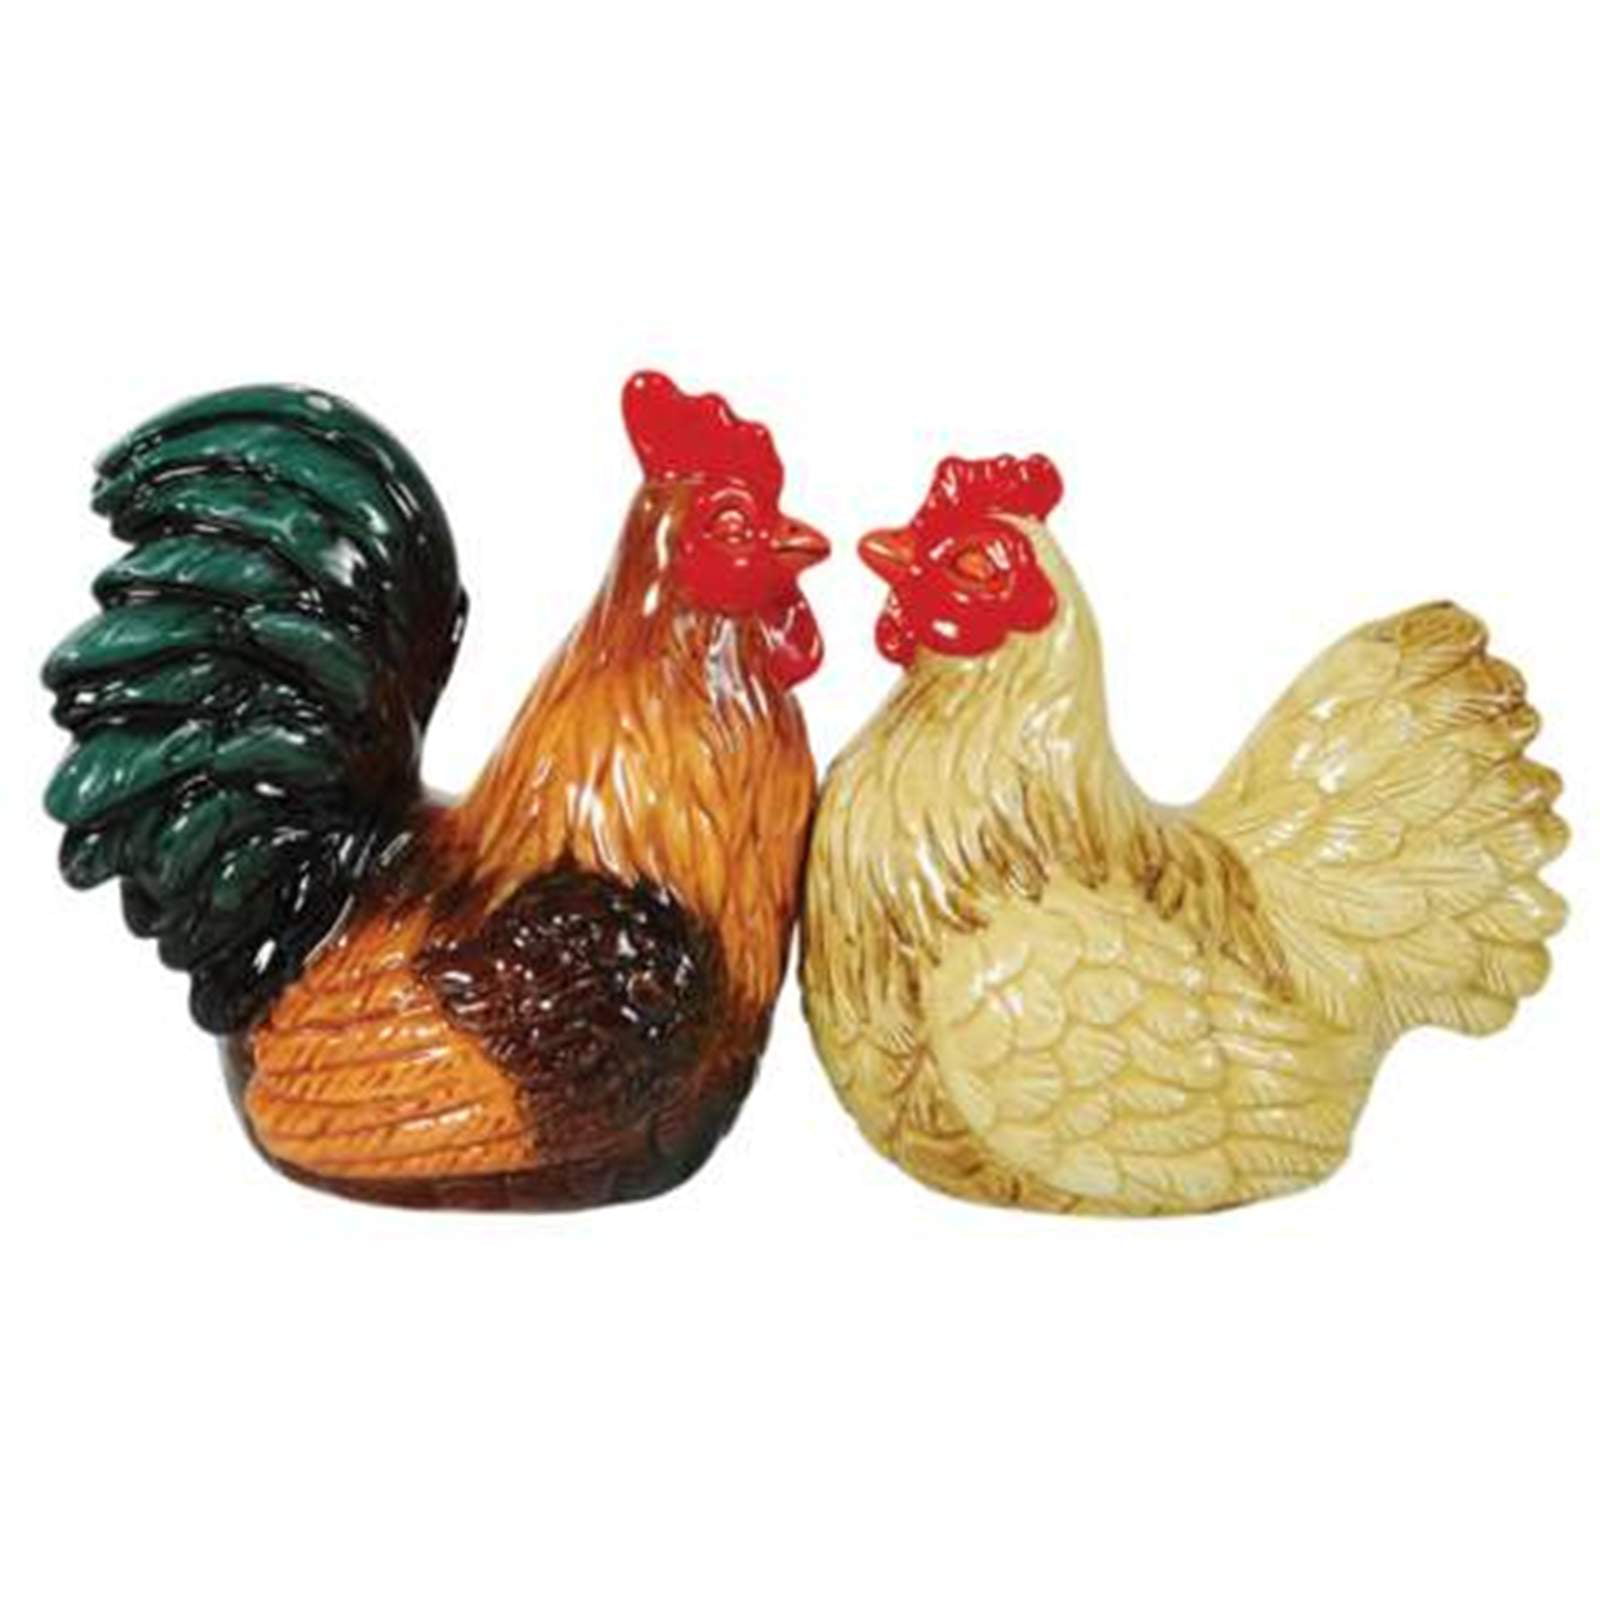 Chickens Salt and Pepper Shakers